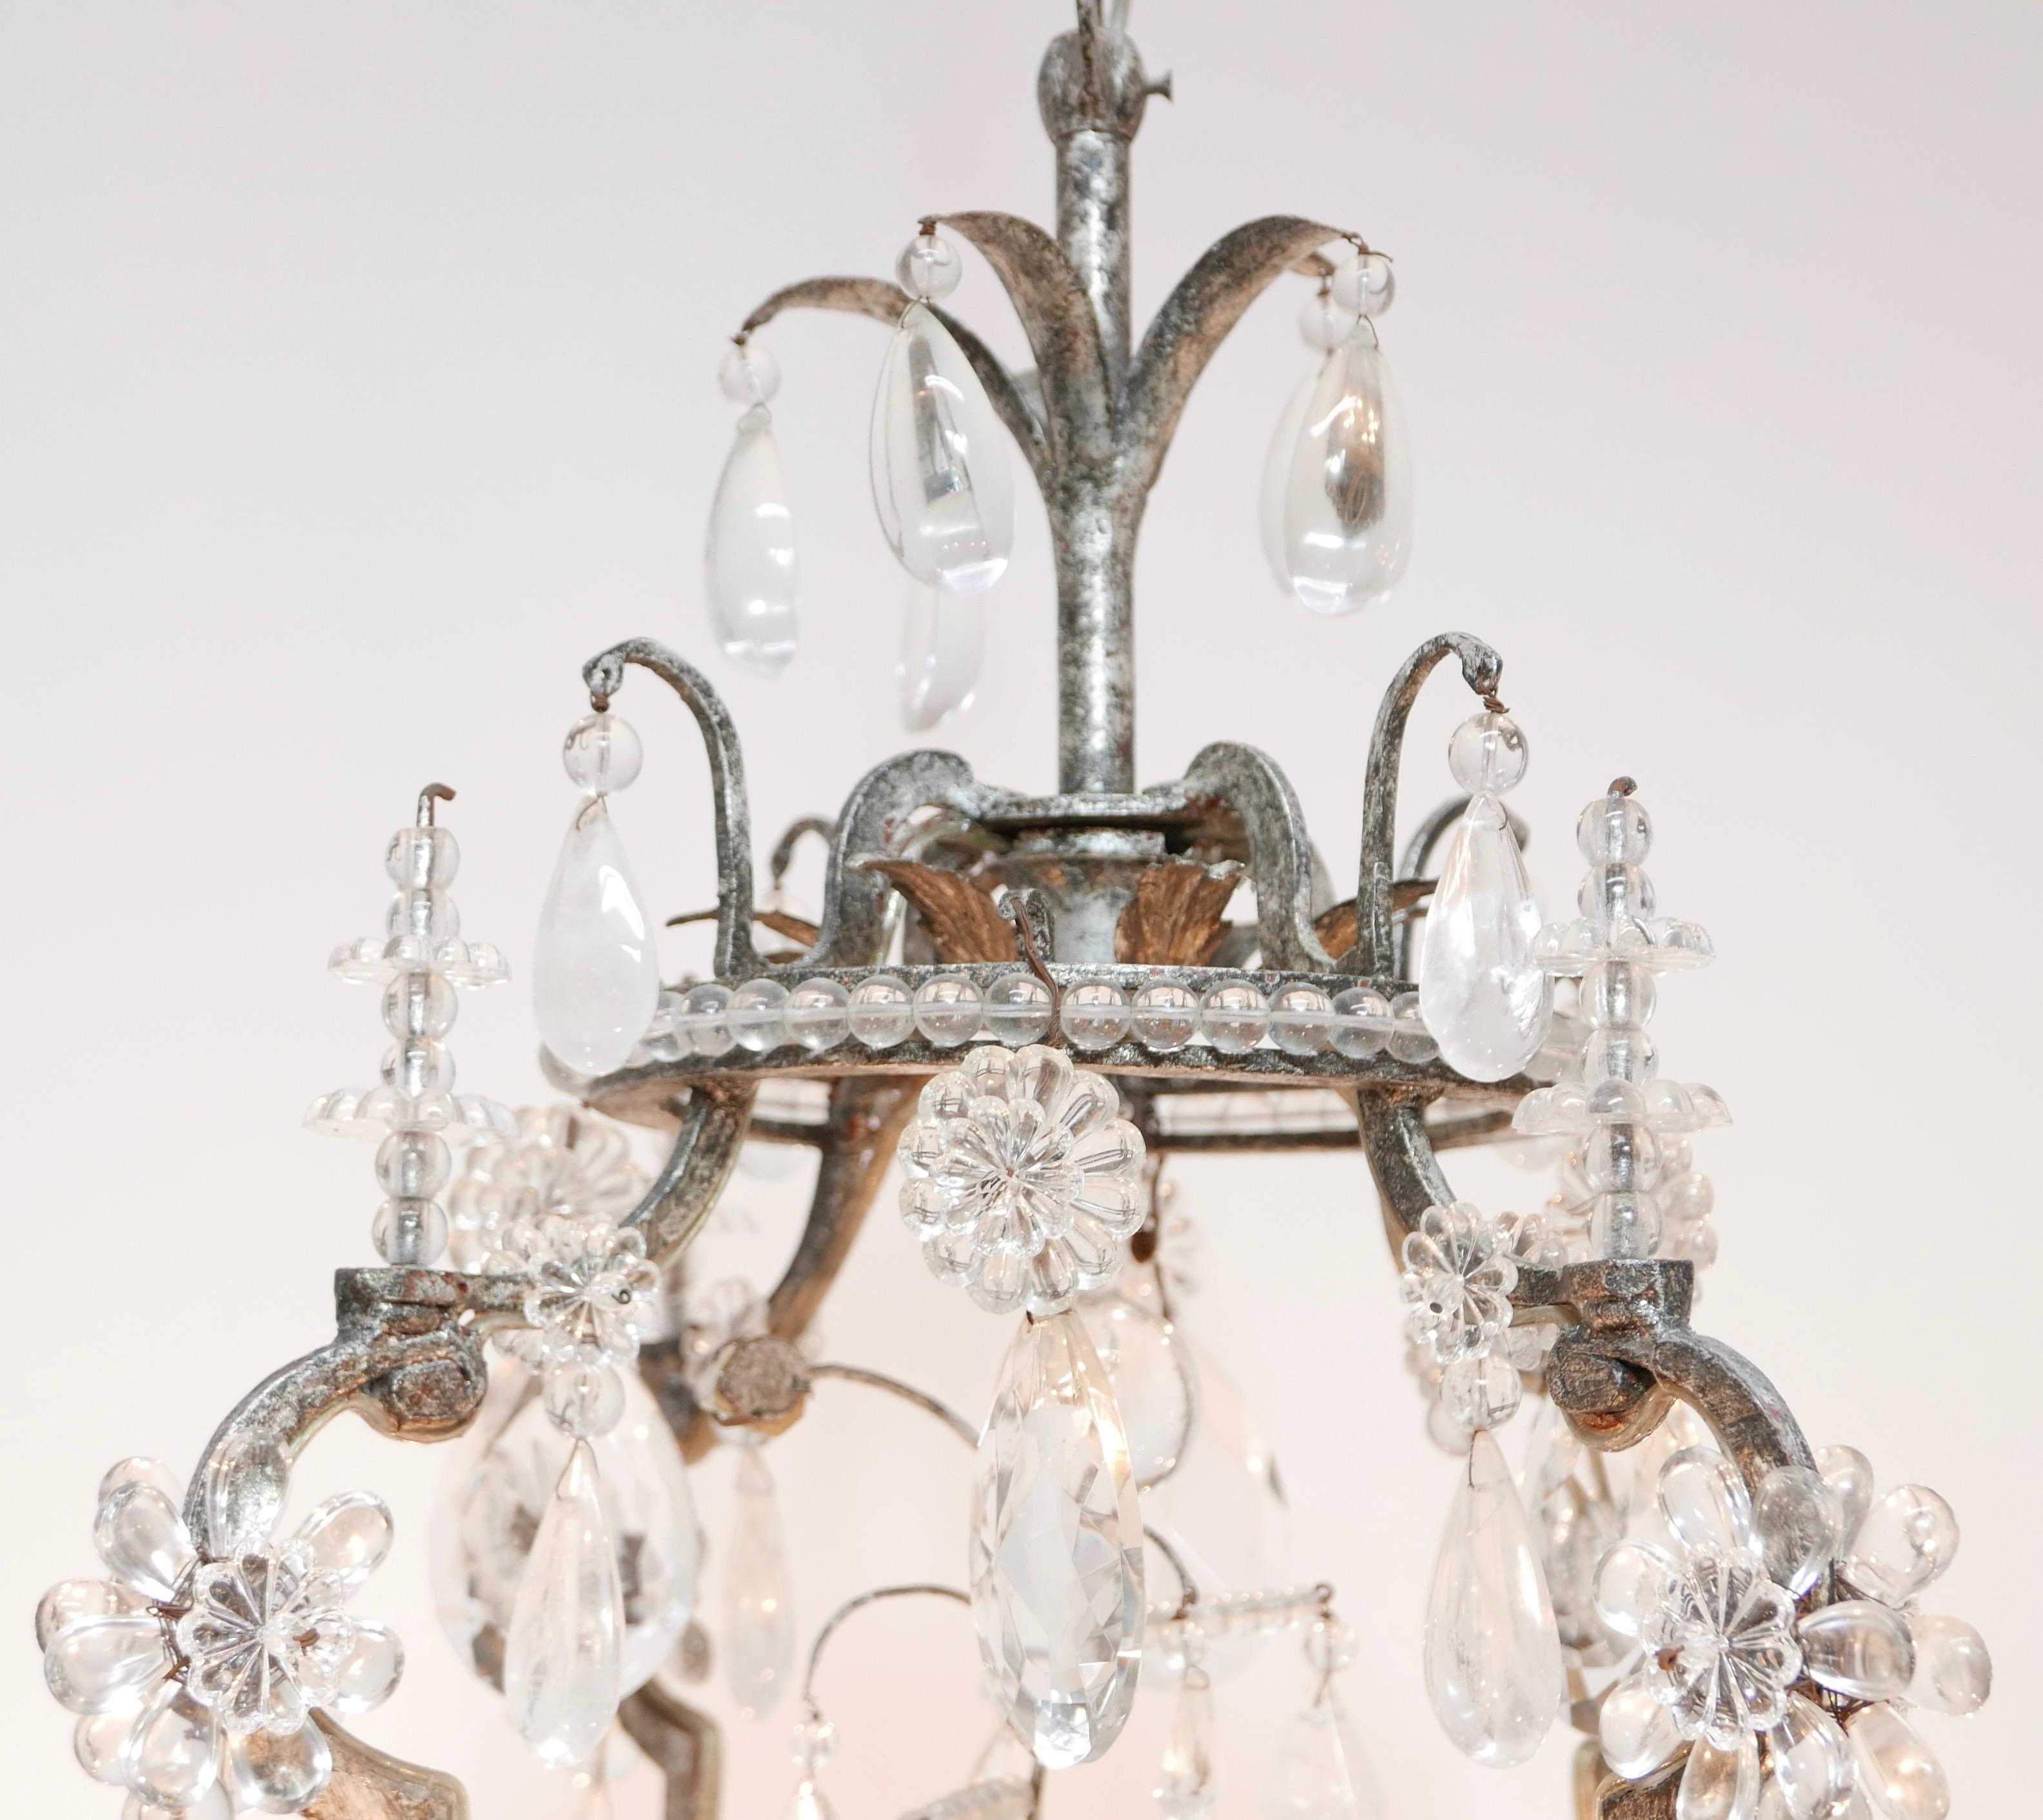 19th Century Large Scale Rock Crystal & Glass Chandelier in the Manner of Maison Baguès For Sale